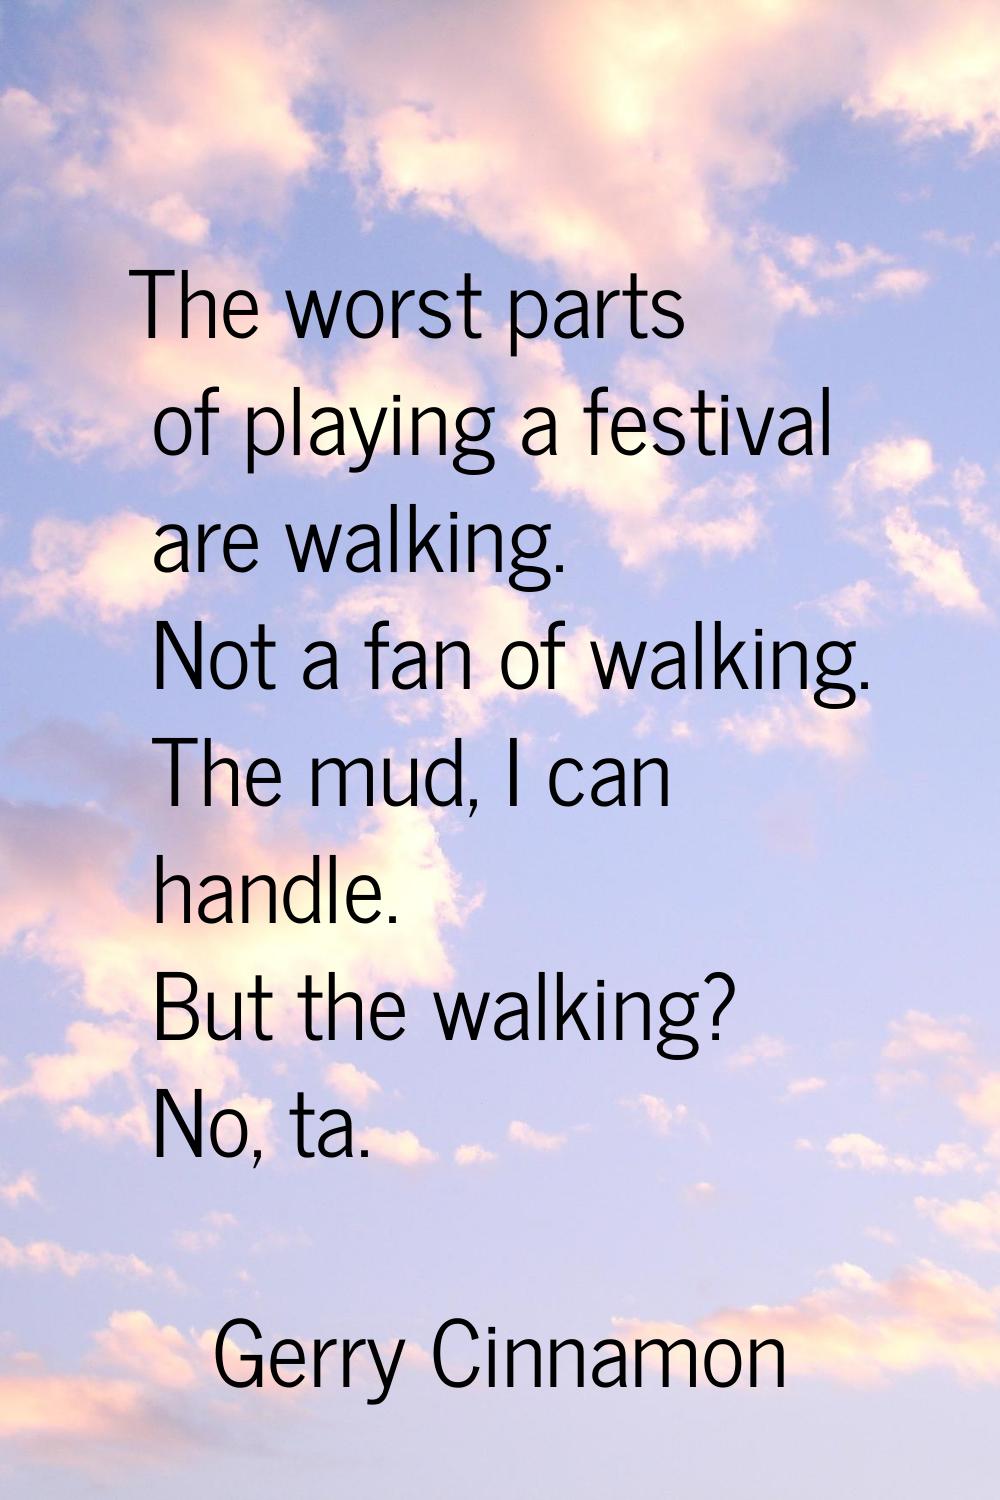 The worst parts of playing a festival are walking. Not a fan of walking. The mud, I can handle. But